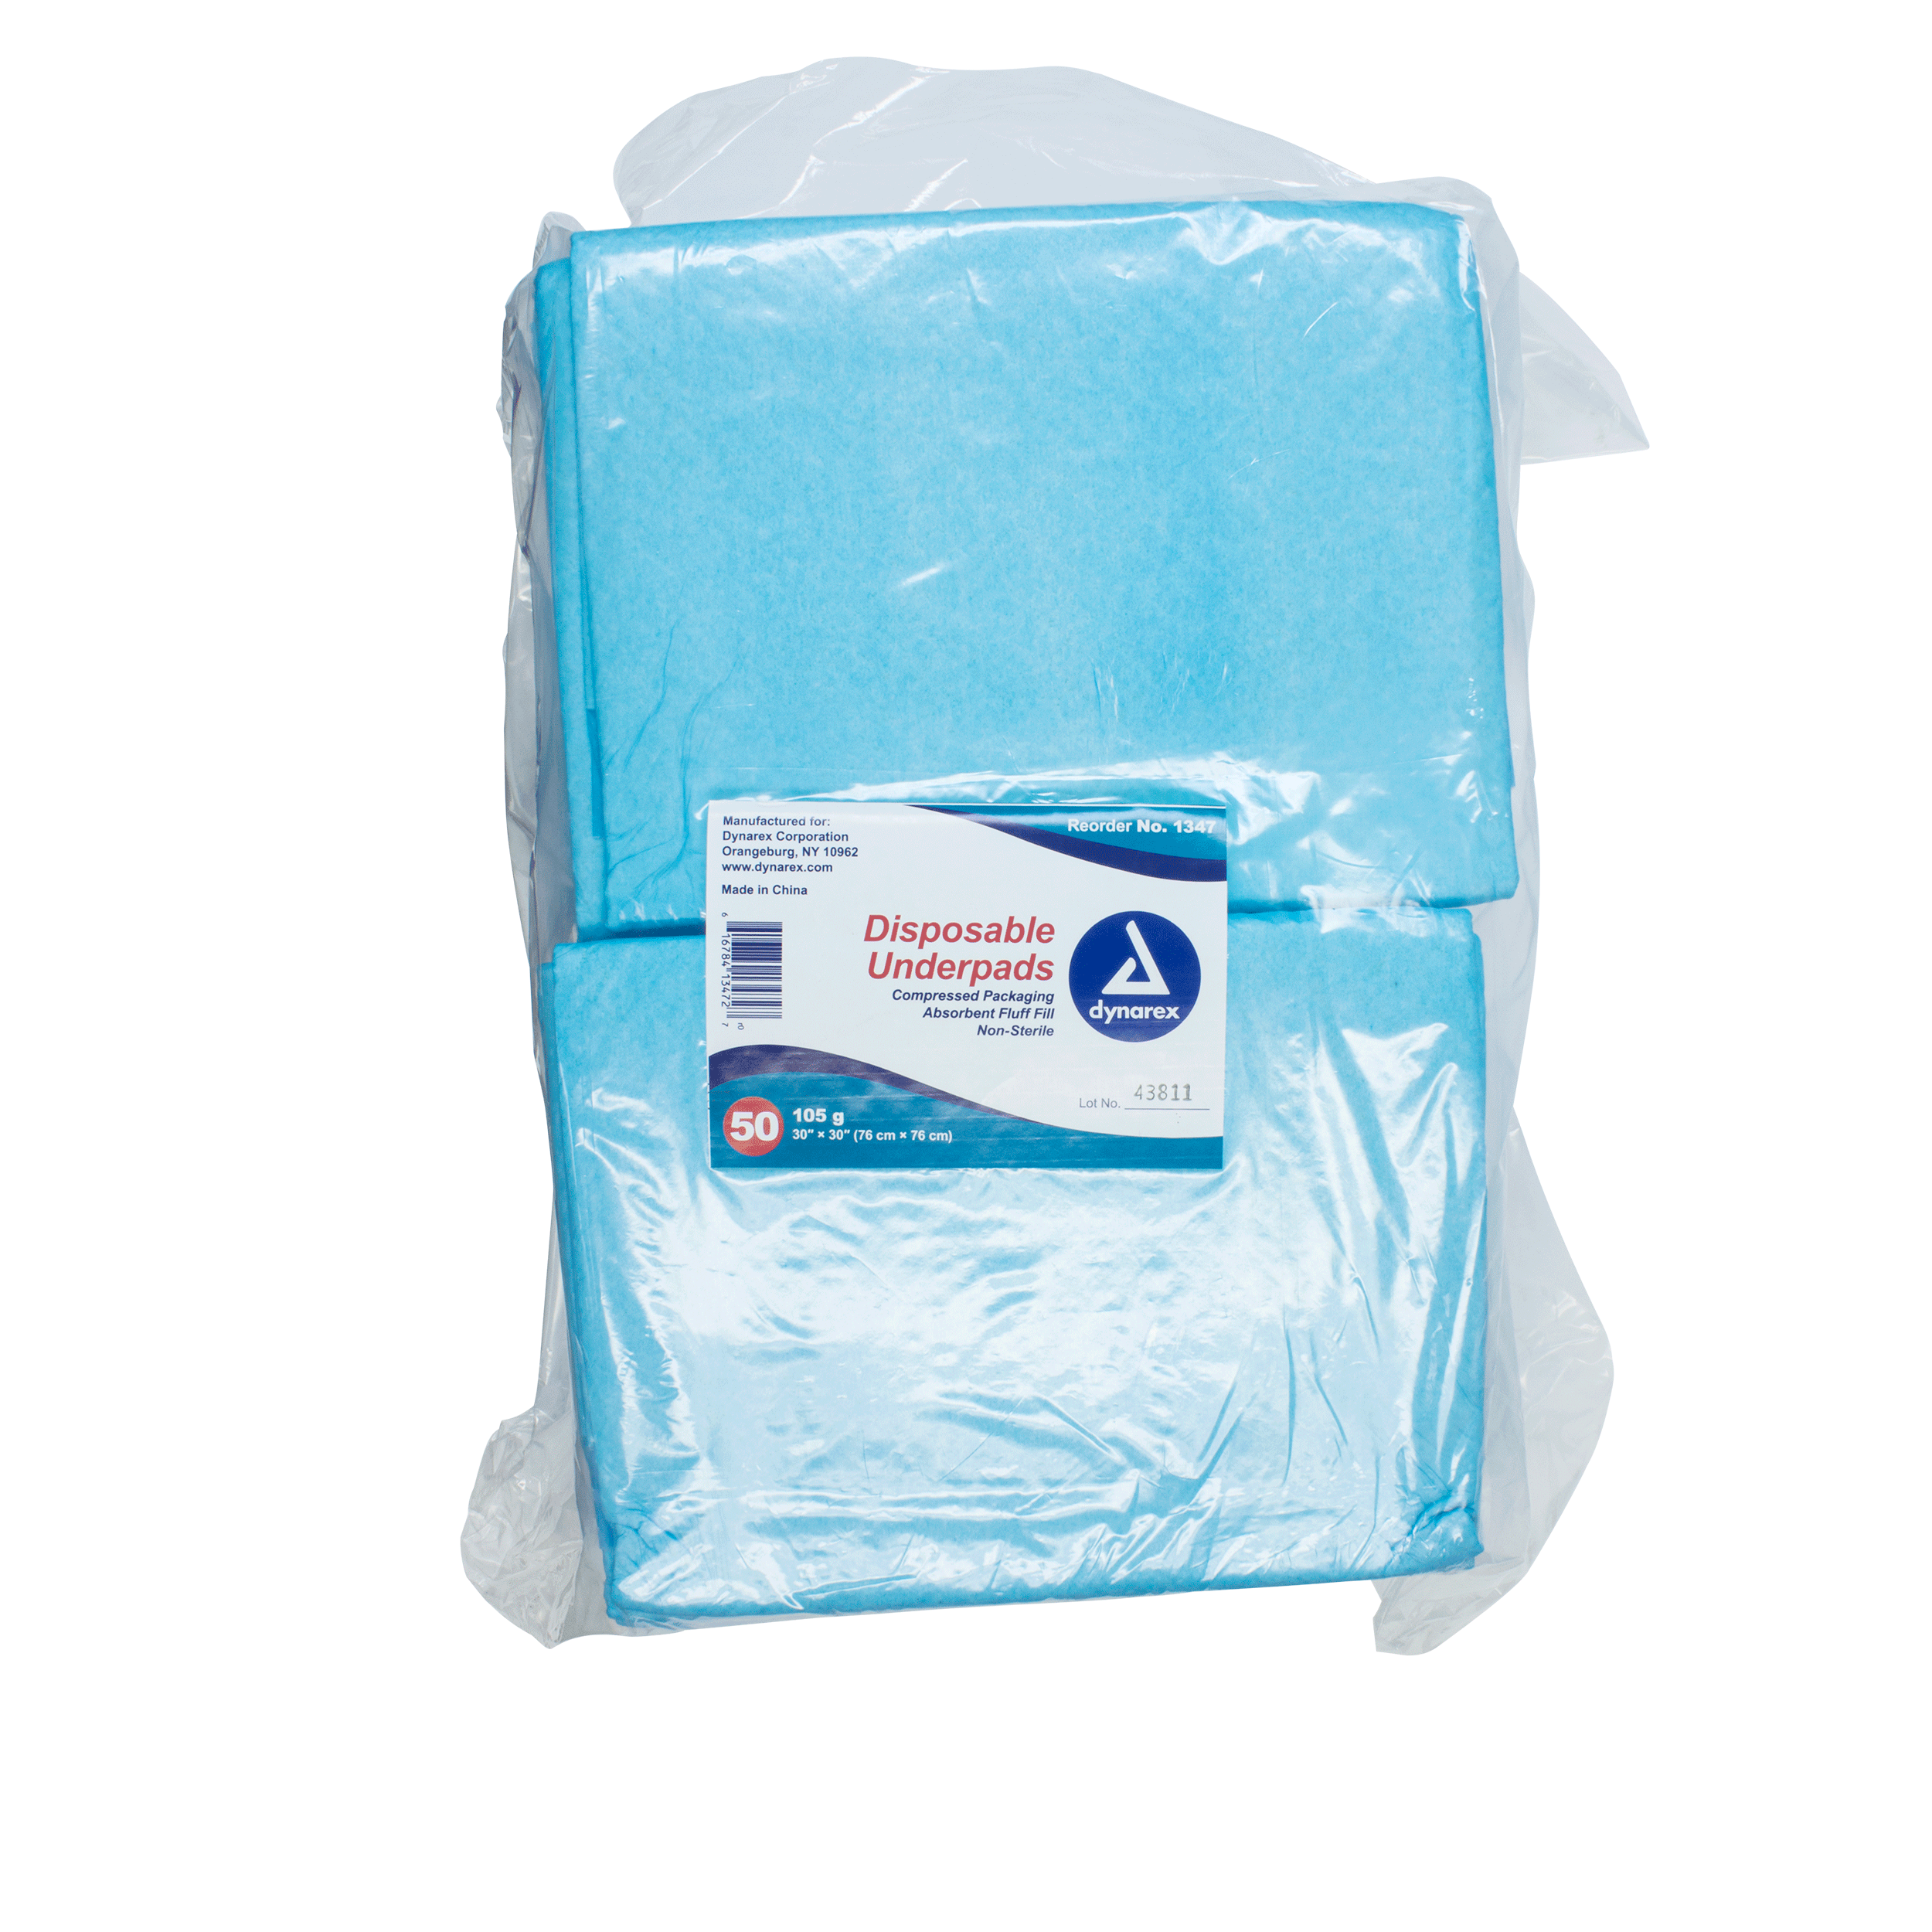 Disposable Underpads, 30 x 30 (105 g) with Polymer